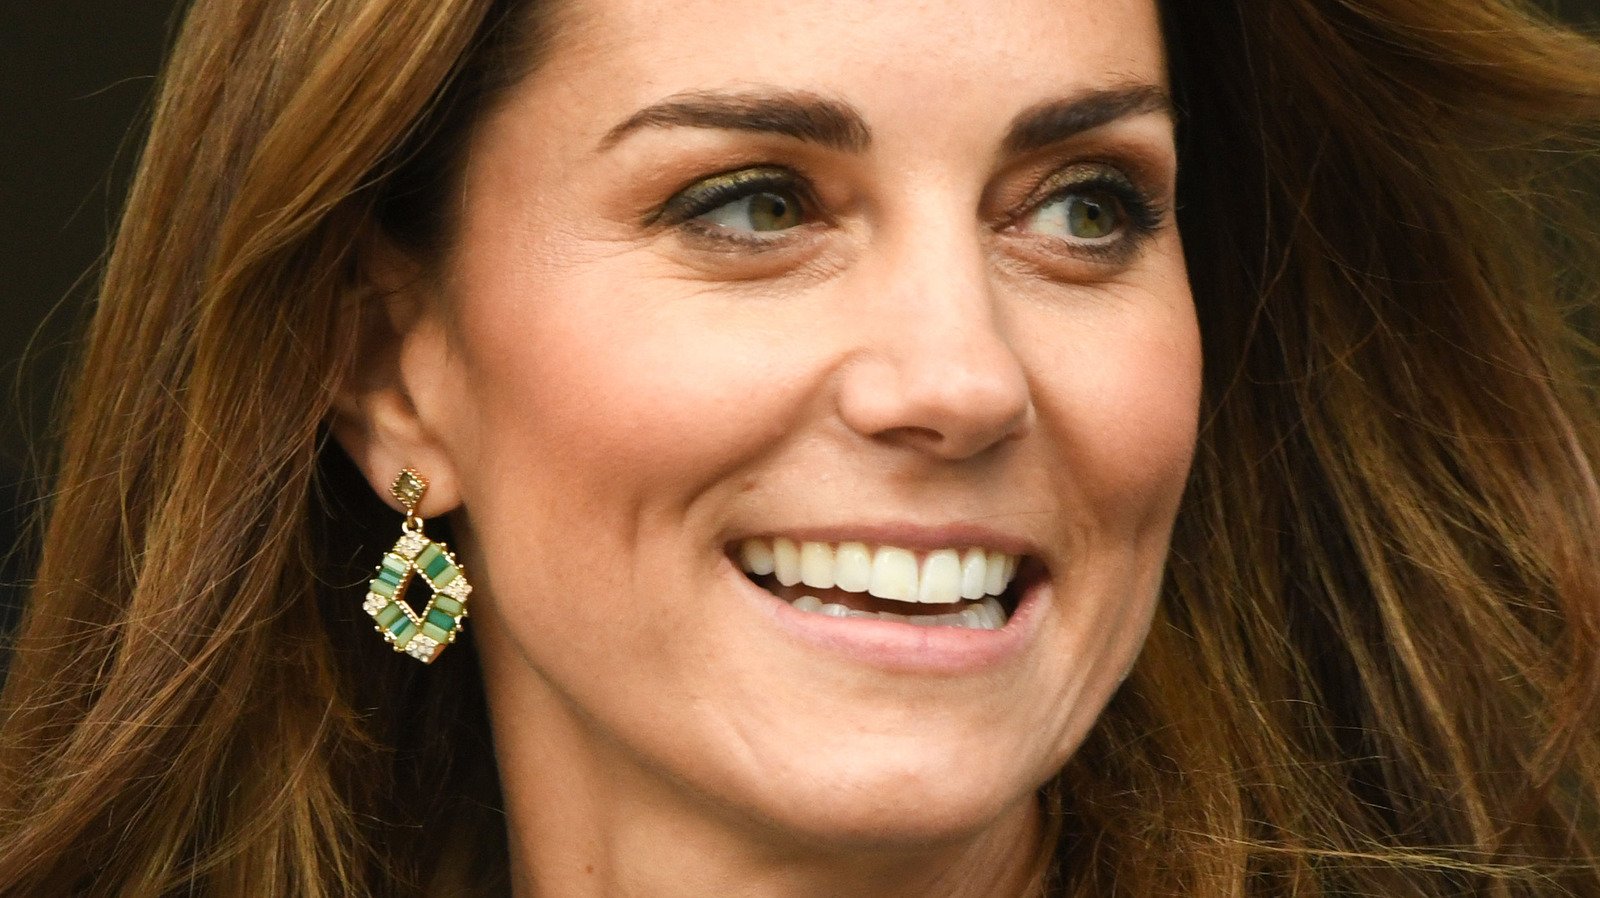 Here's What Kate Middleton Looks Like Without Makeup